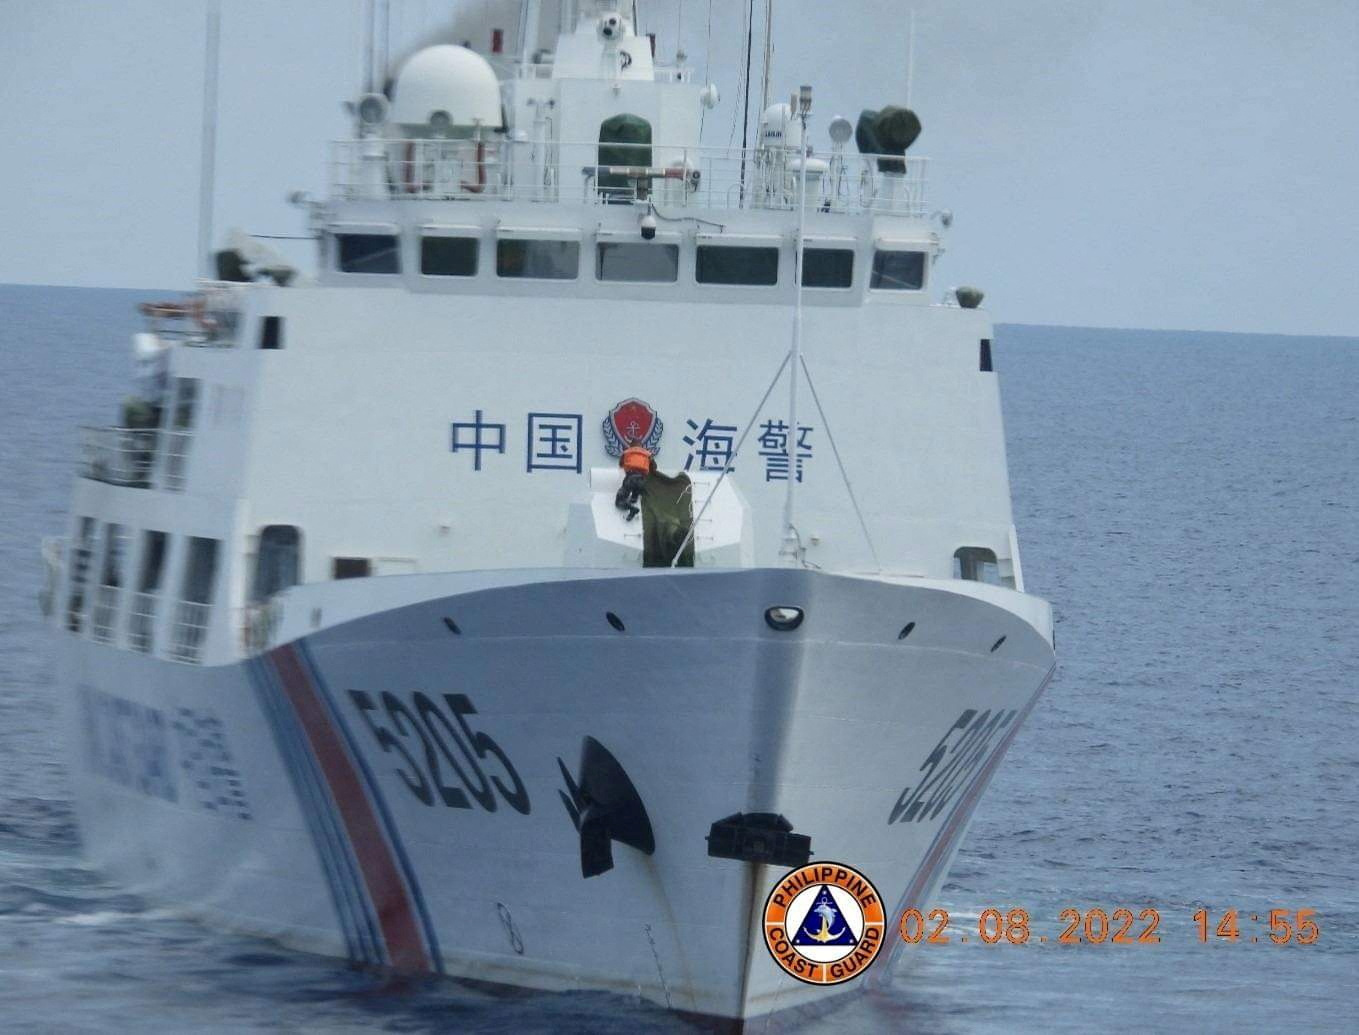 Chinese coast guard ship in Second Thomas Shoal